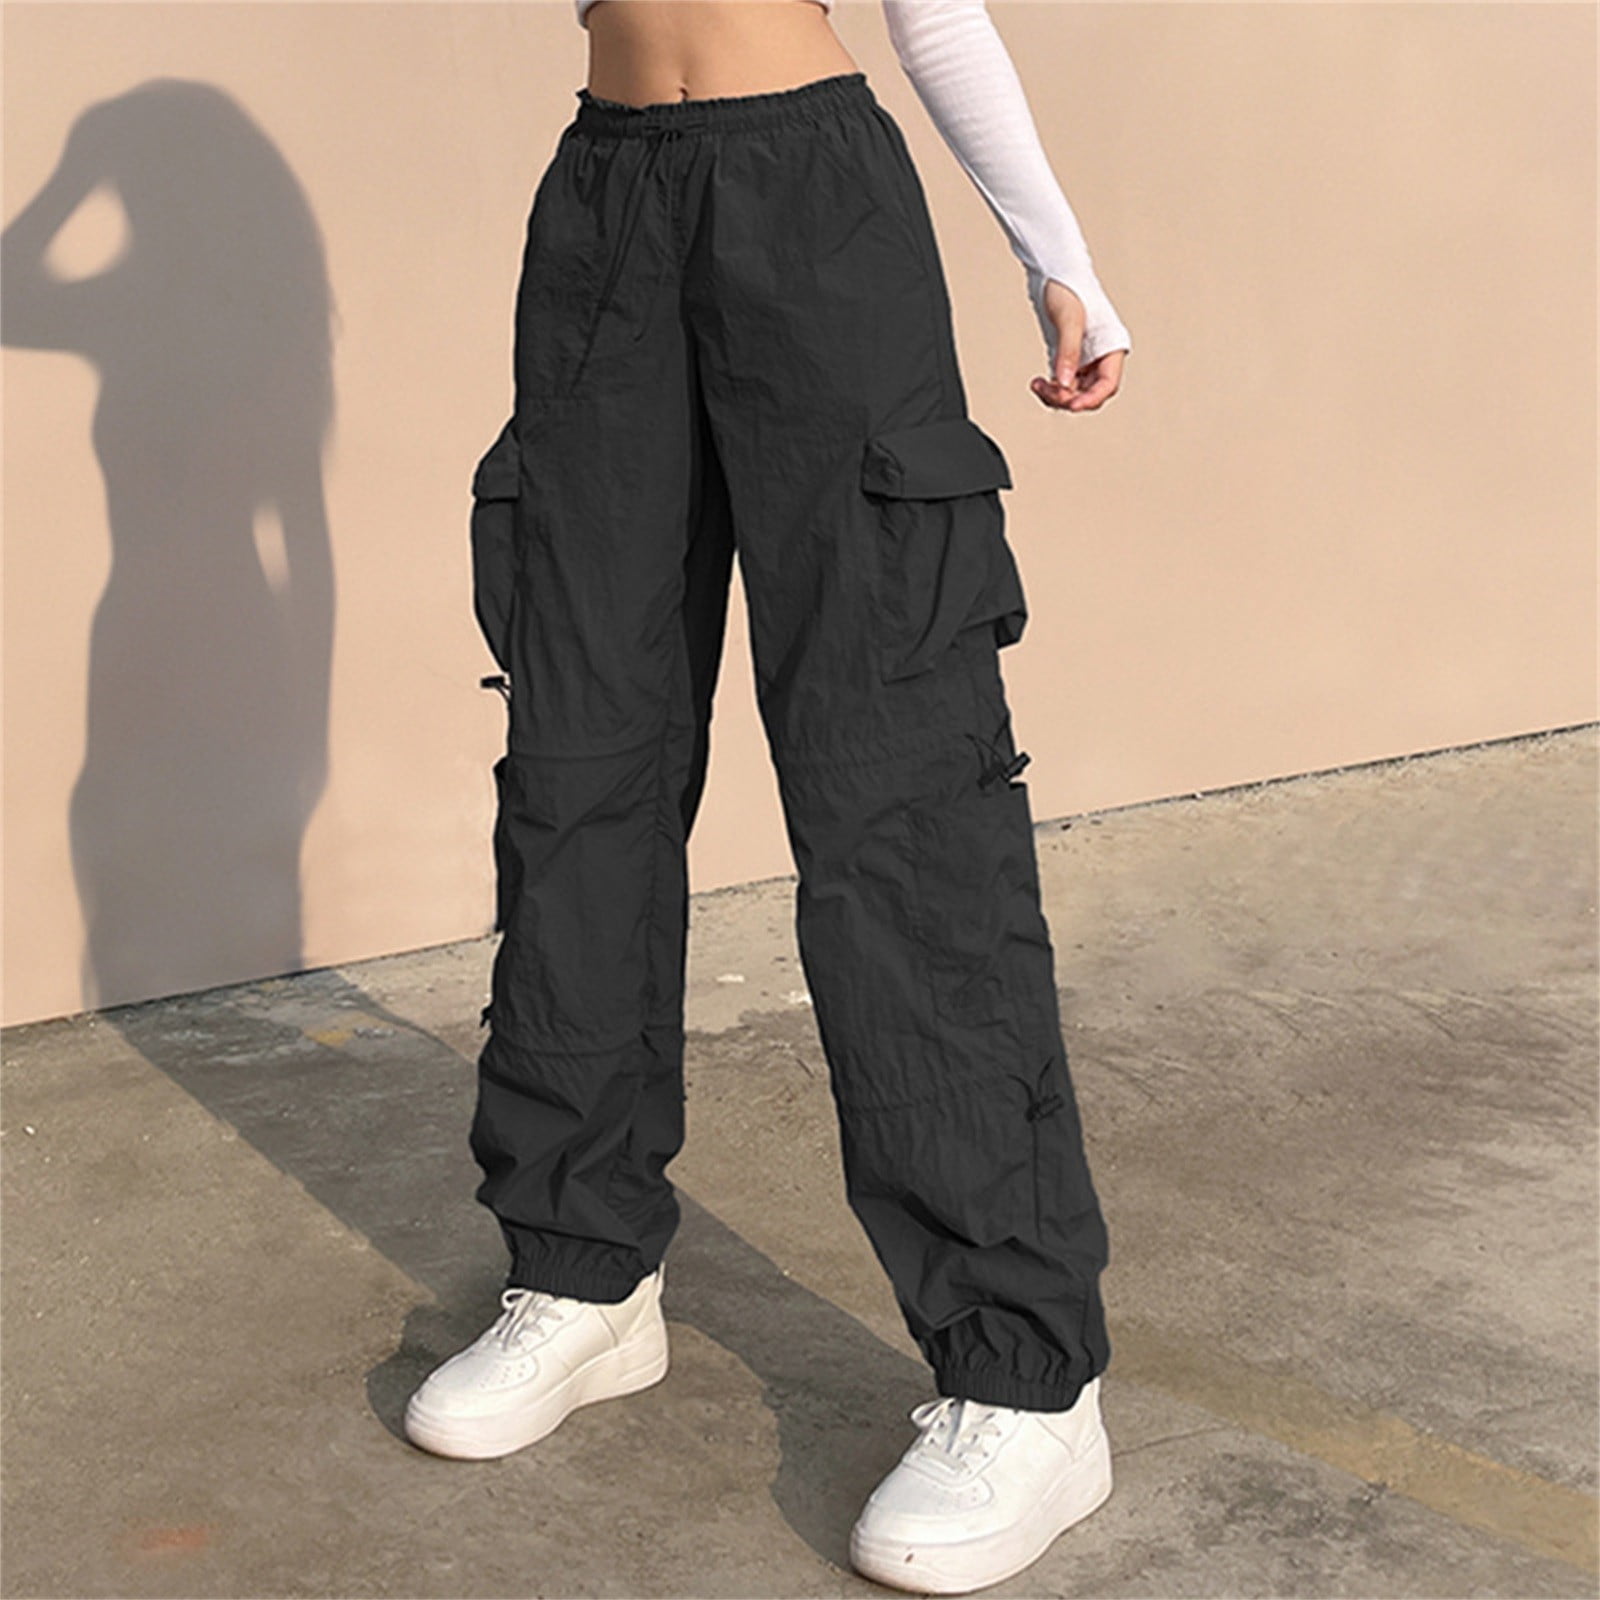 CAICJ98 for Women Womens Cargo Joggers High Waisted Basic Casual Tapered Sweatpants  Pants Black,M 